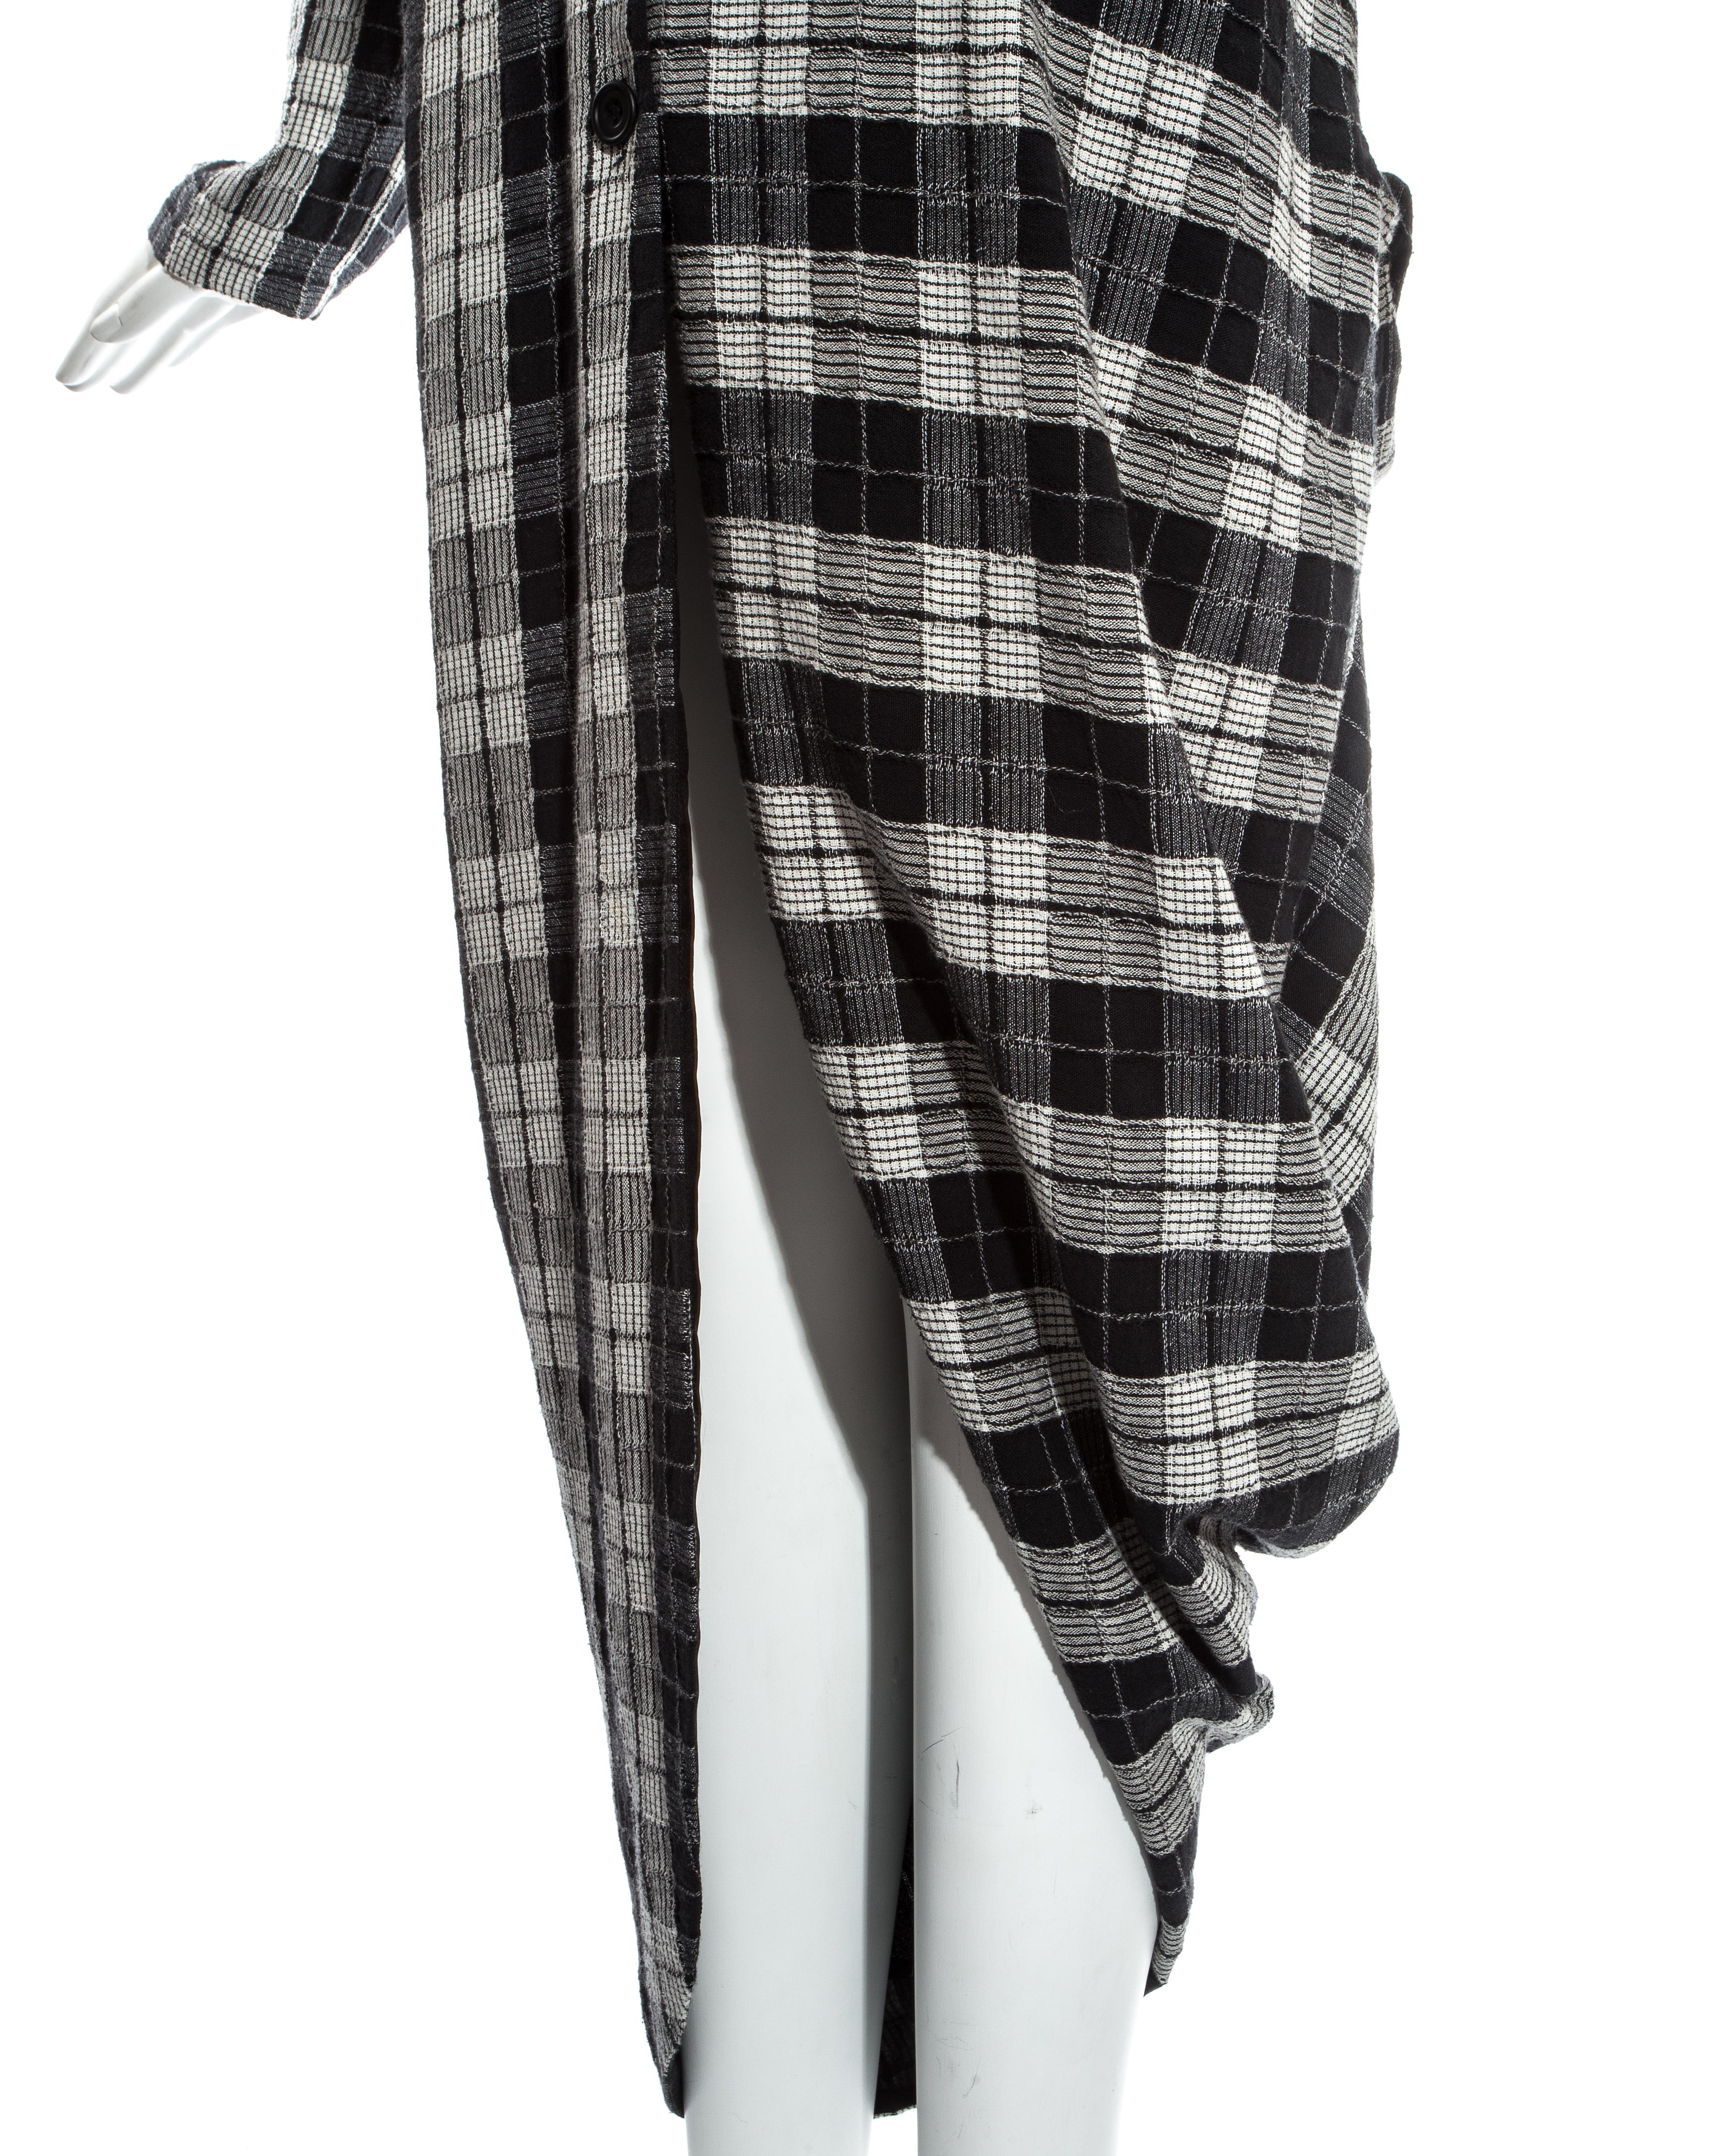 John Galliano black and white plaid cotton draped bustled shirt dress, fw 1987 In Excellent Condition For Sale In London, London